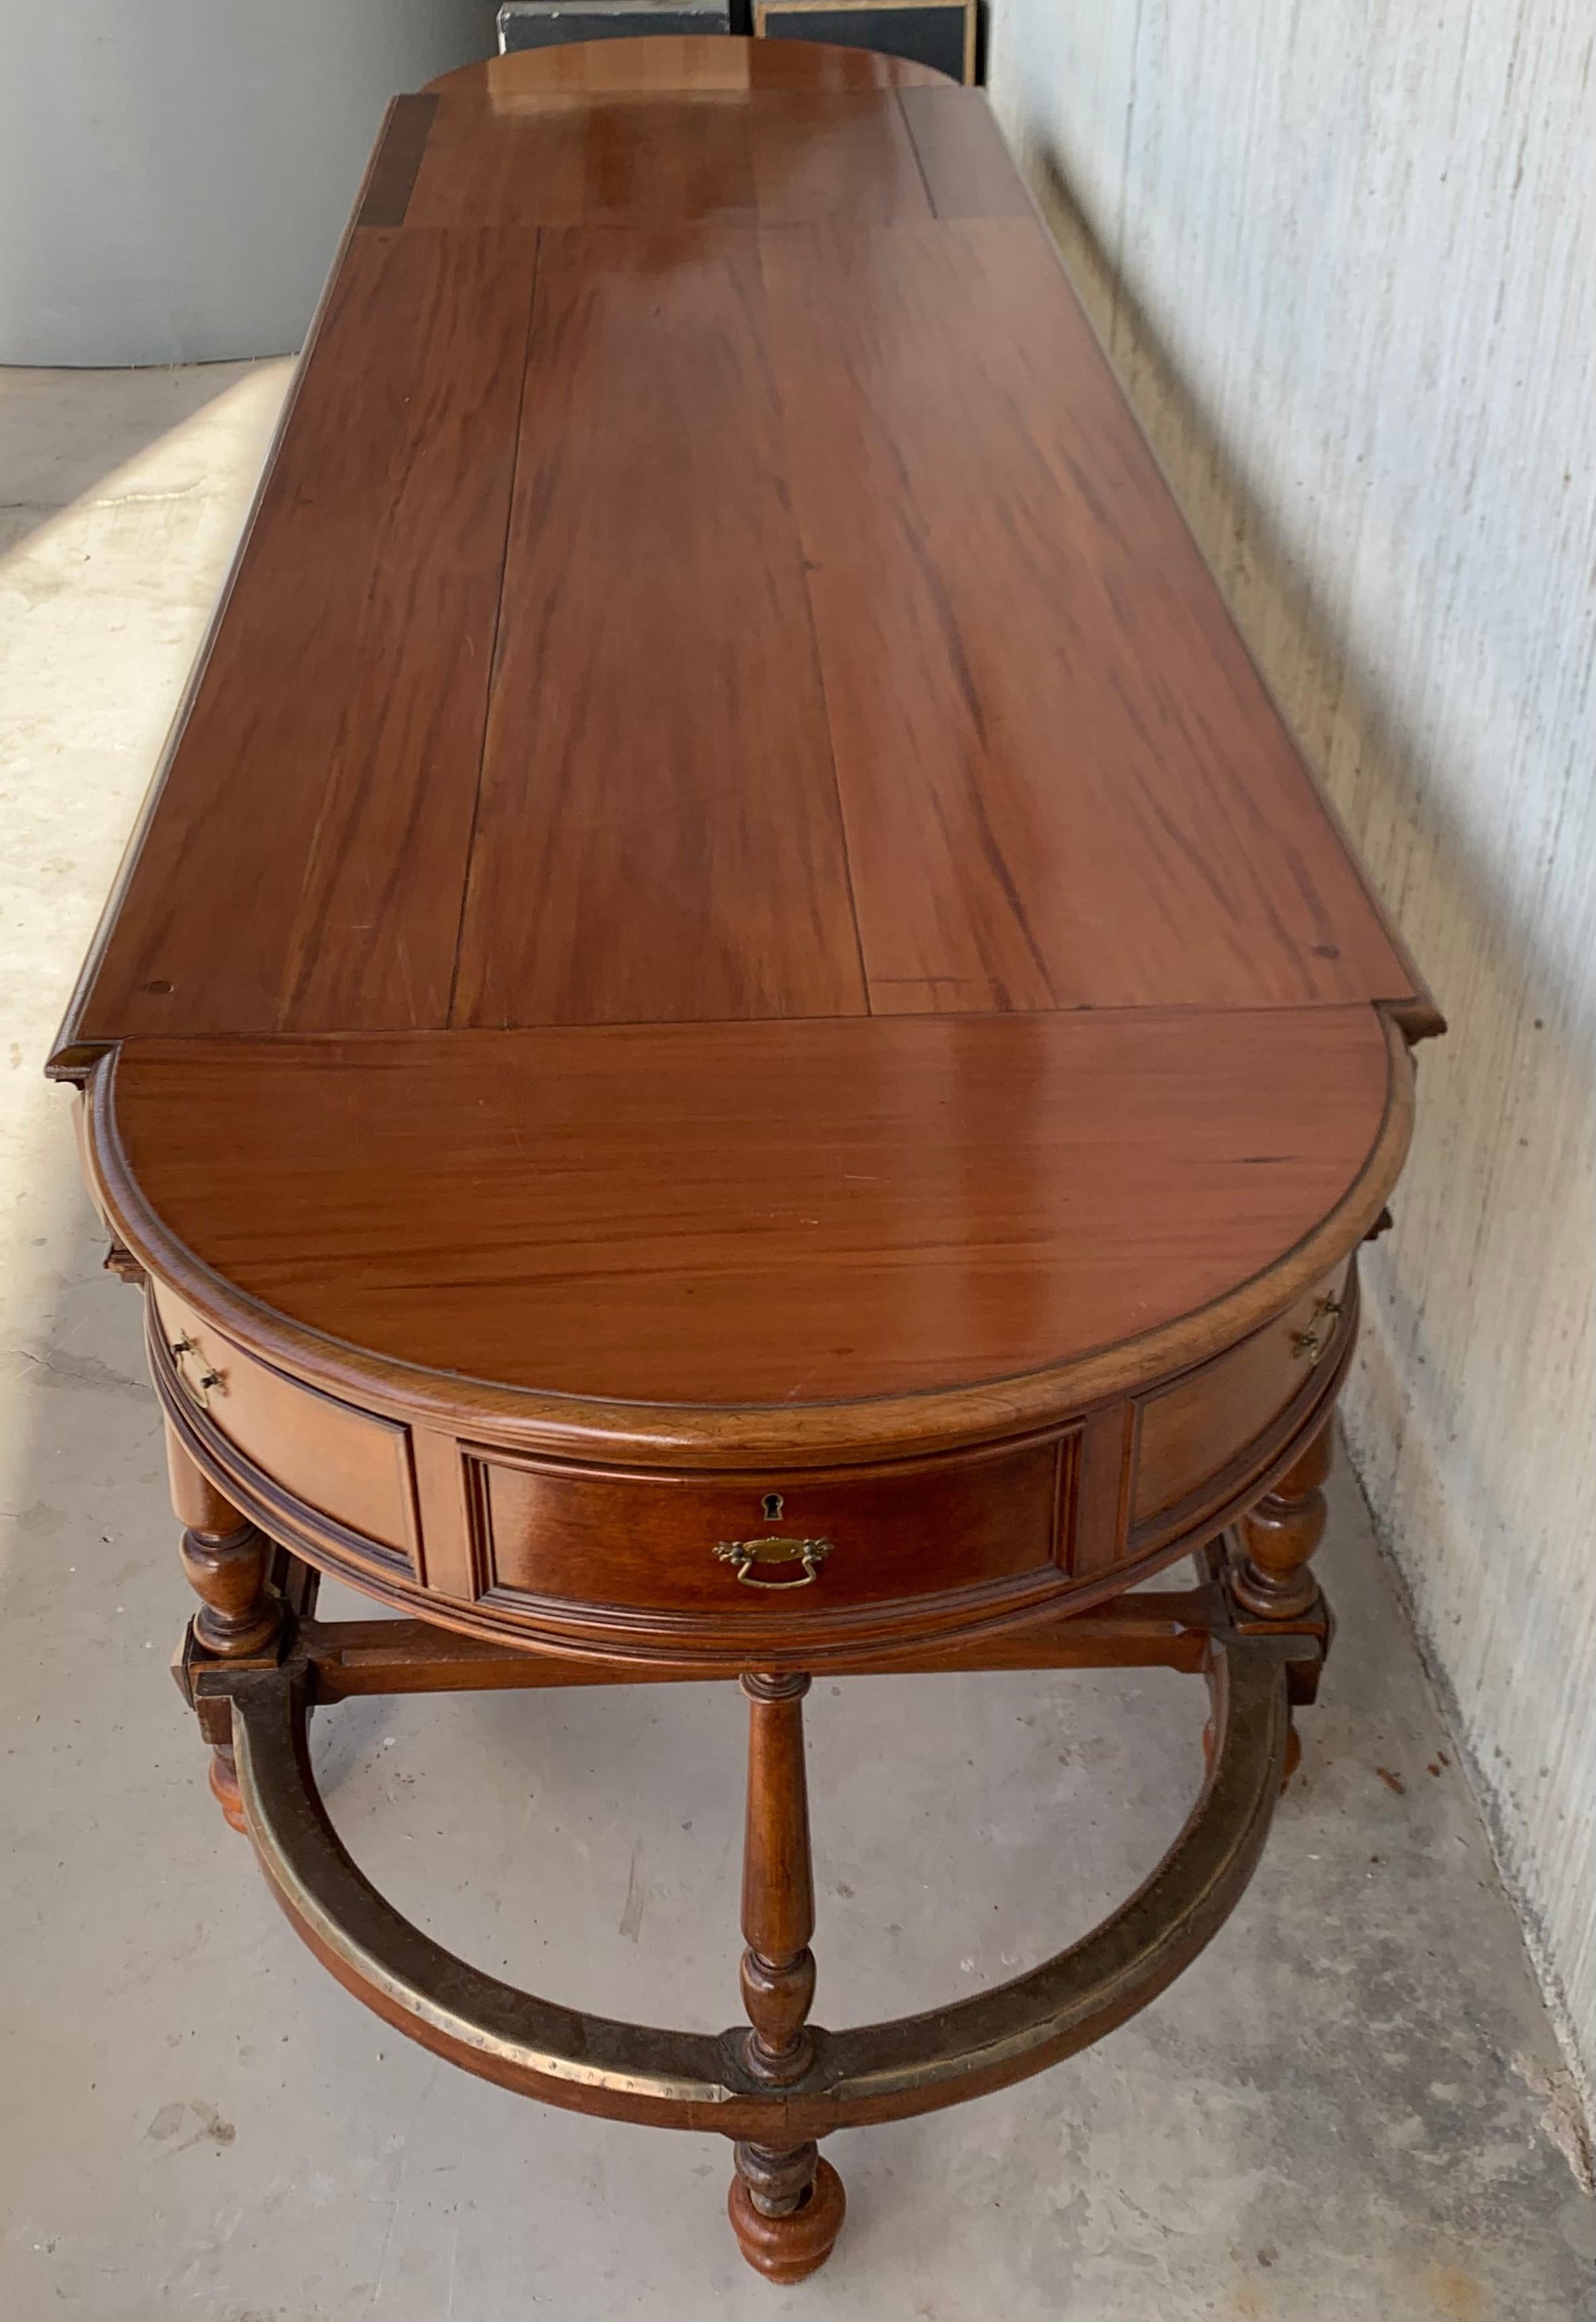 Spanish 12 Foot Oval Center Table with Drawers in Both Sides, 20th Century For Sale